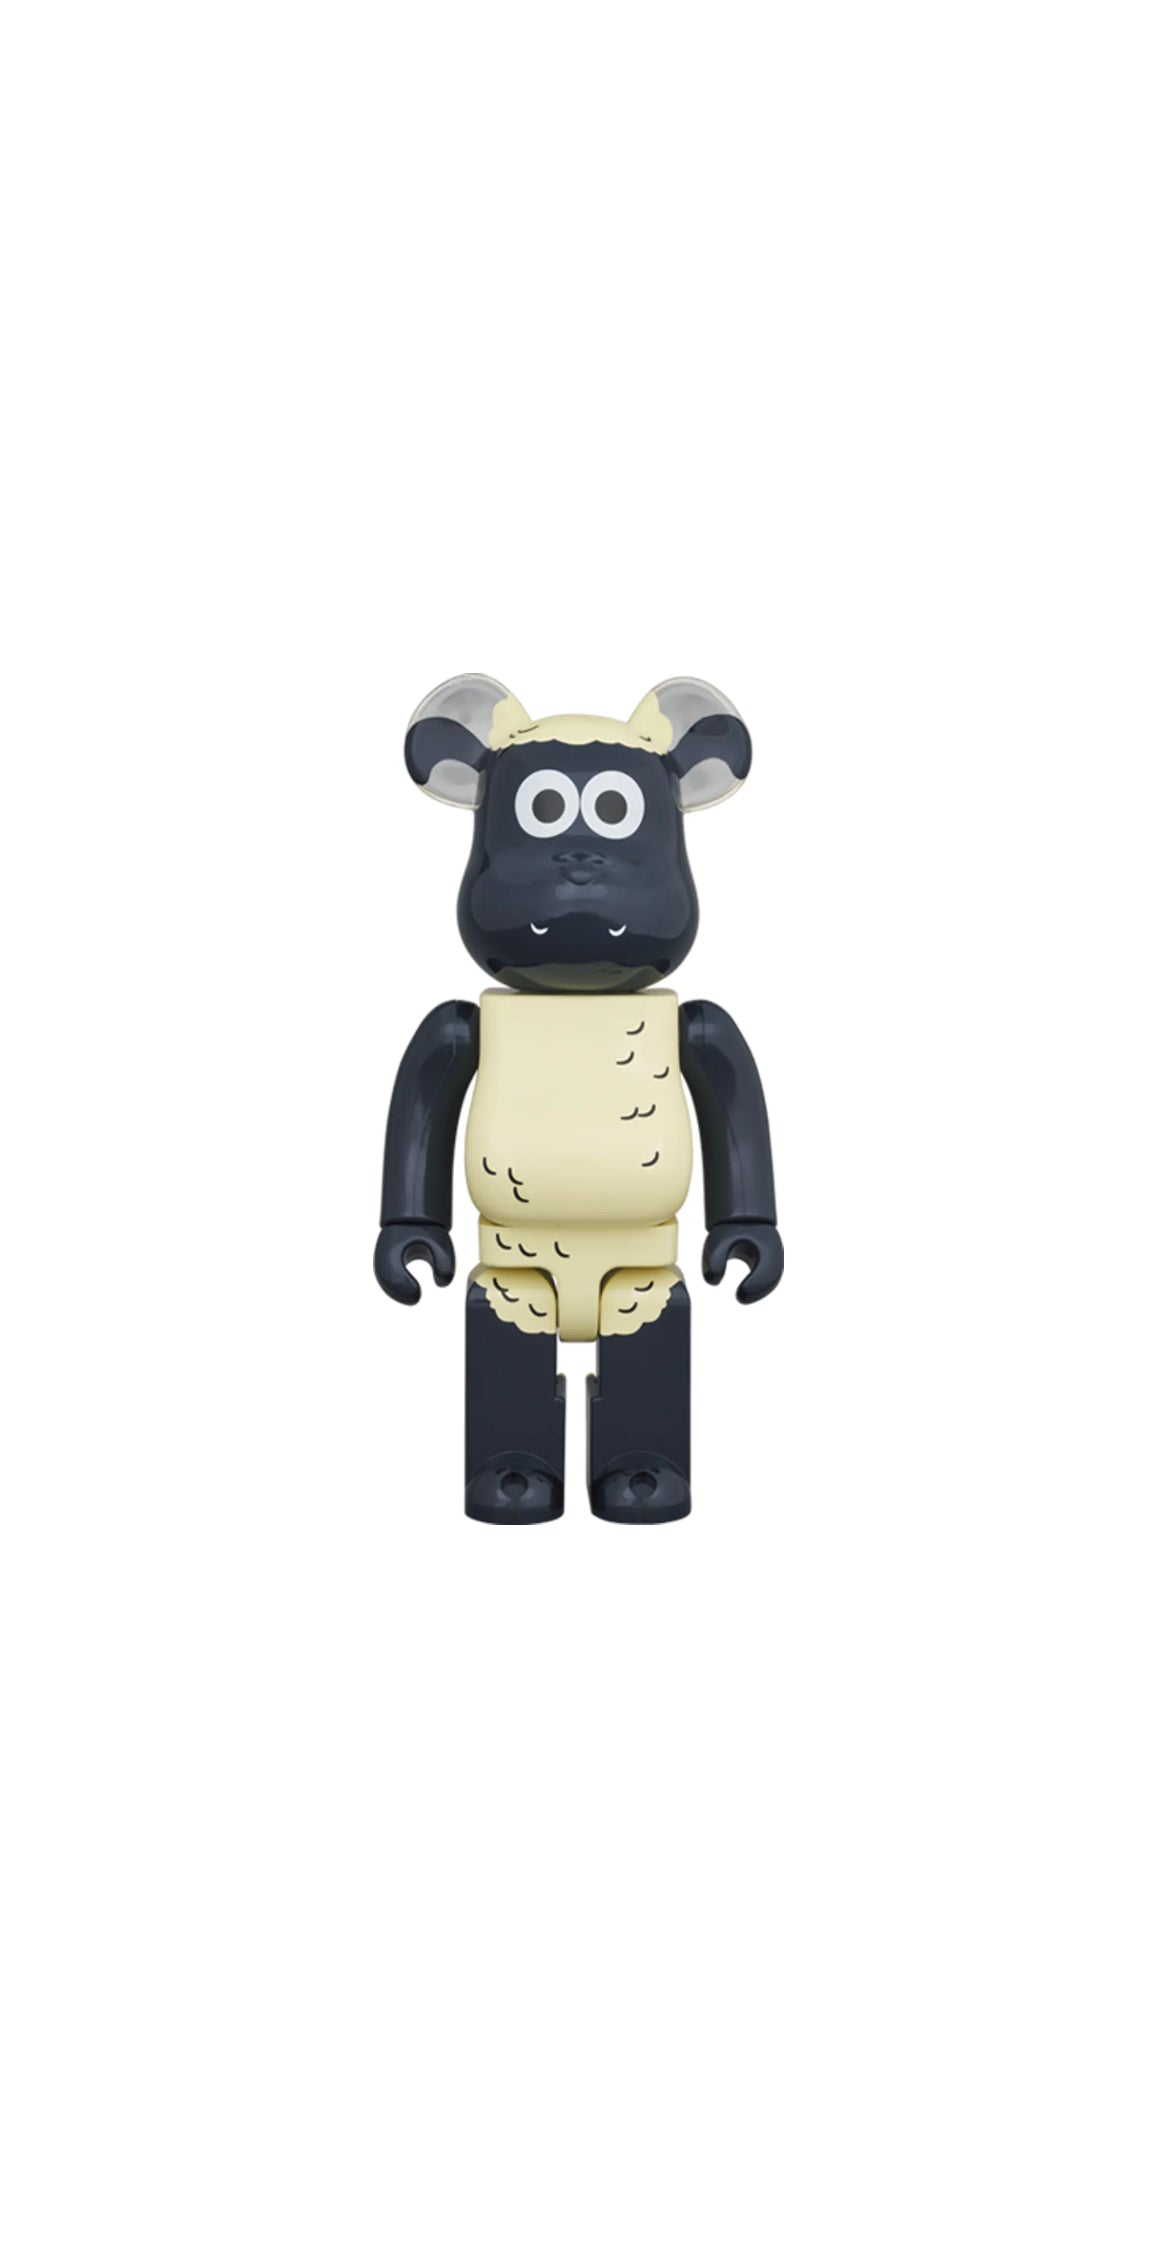 Bearbrick Shaun The Sheep 1000% – DRIPPED COLLECTIONS